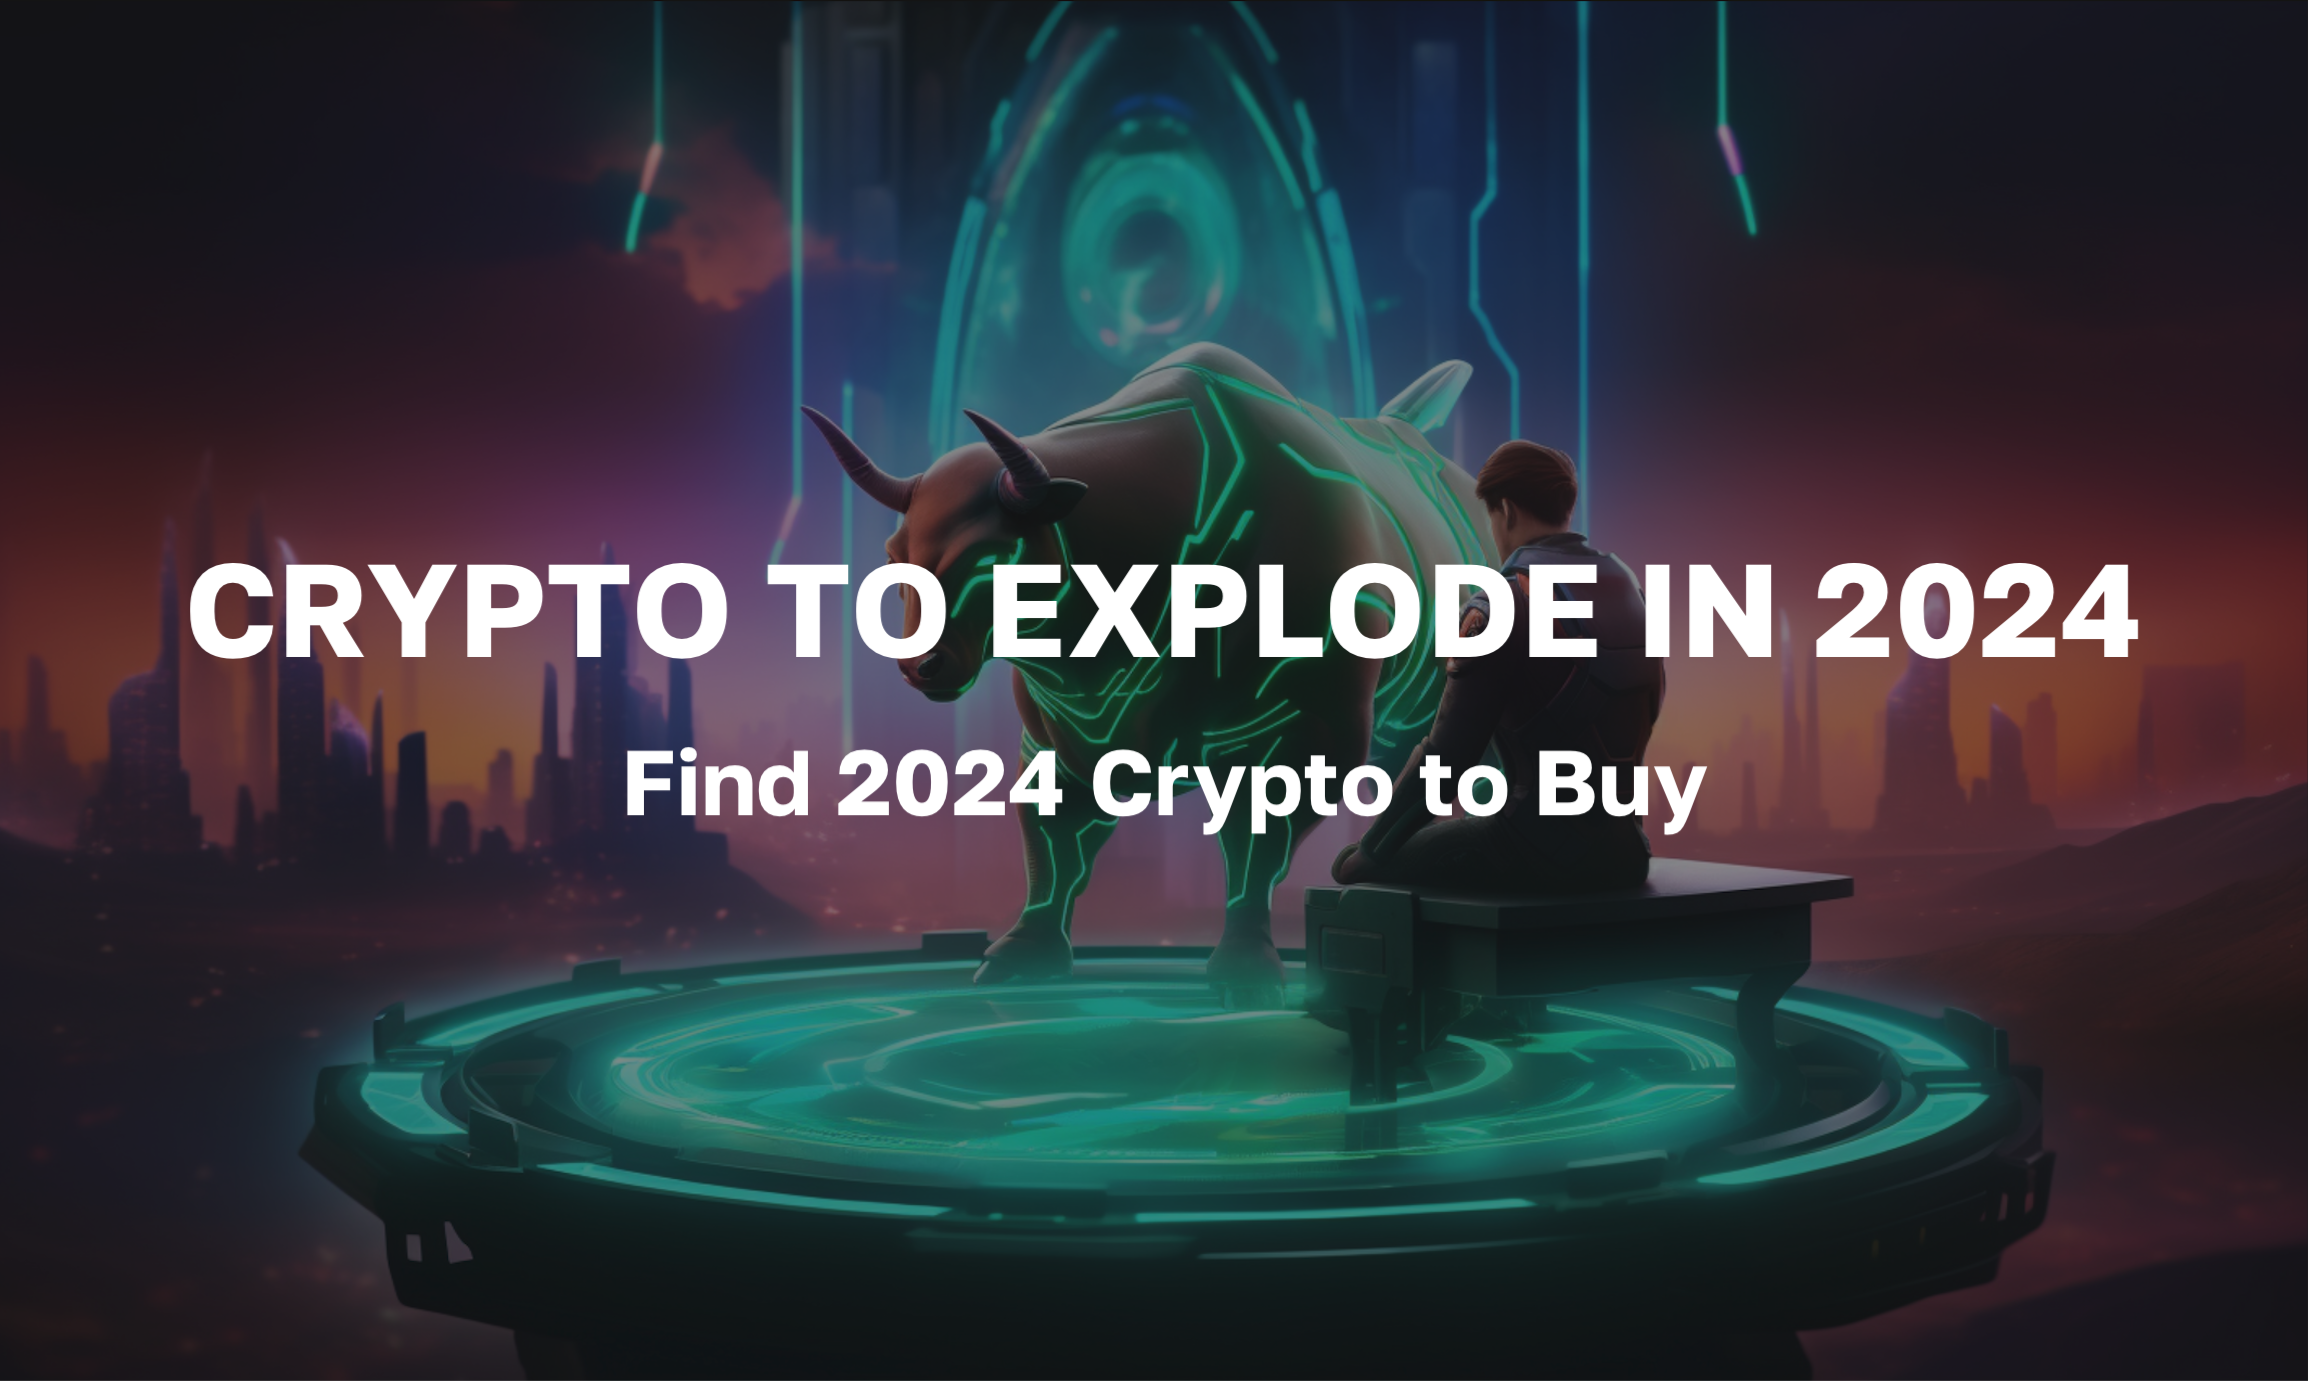 Which Crypto Will Explode in 2024? Find 2024 Crypto to Buy